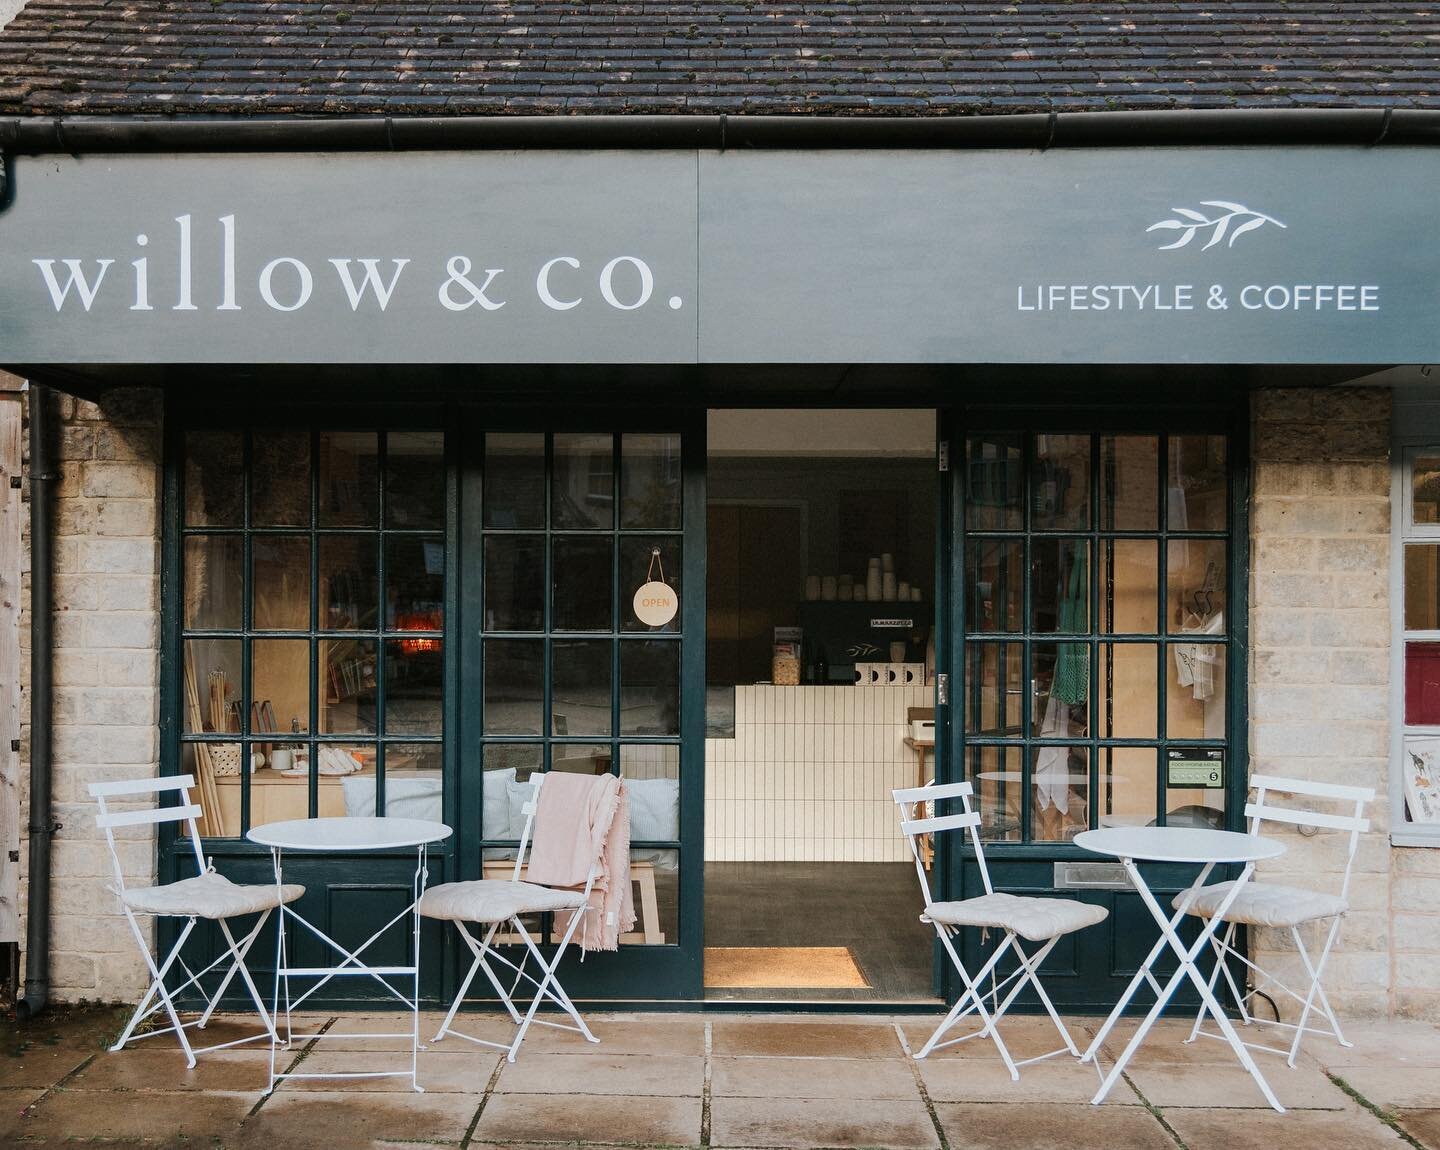 It&rsquo;s almost Friday!!! 

📷 by @sarahbuttonphoto 

#theweekend #coffeetime #coffeeshopsoftheuk #smallcoffeeshops #tinyshops #stroud #nailsworth #thecotswolds #visitthecotswolds #lifestyleandcoffee